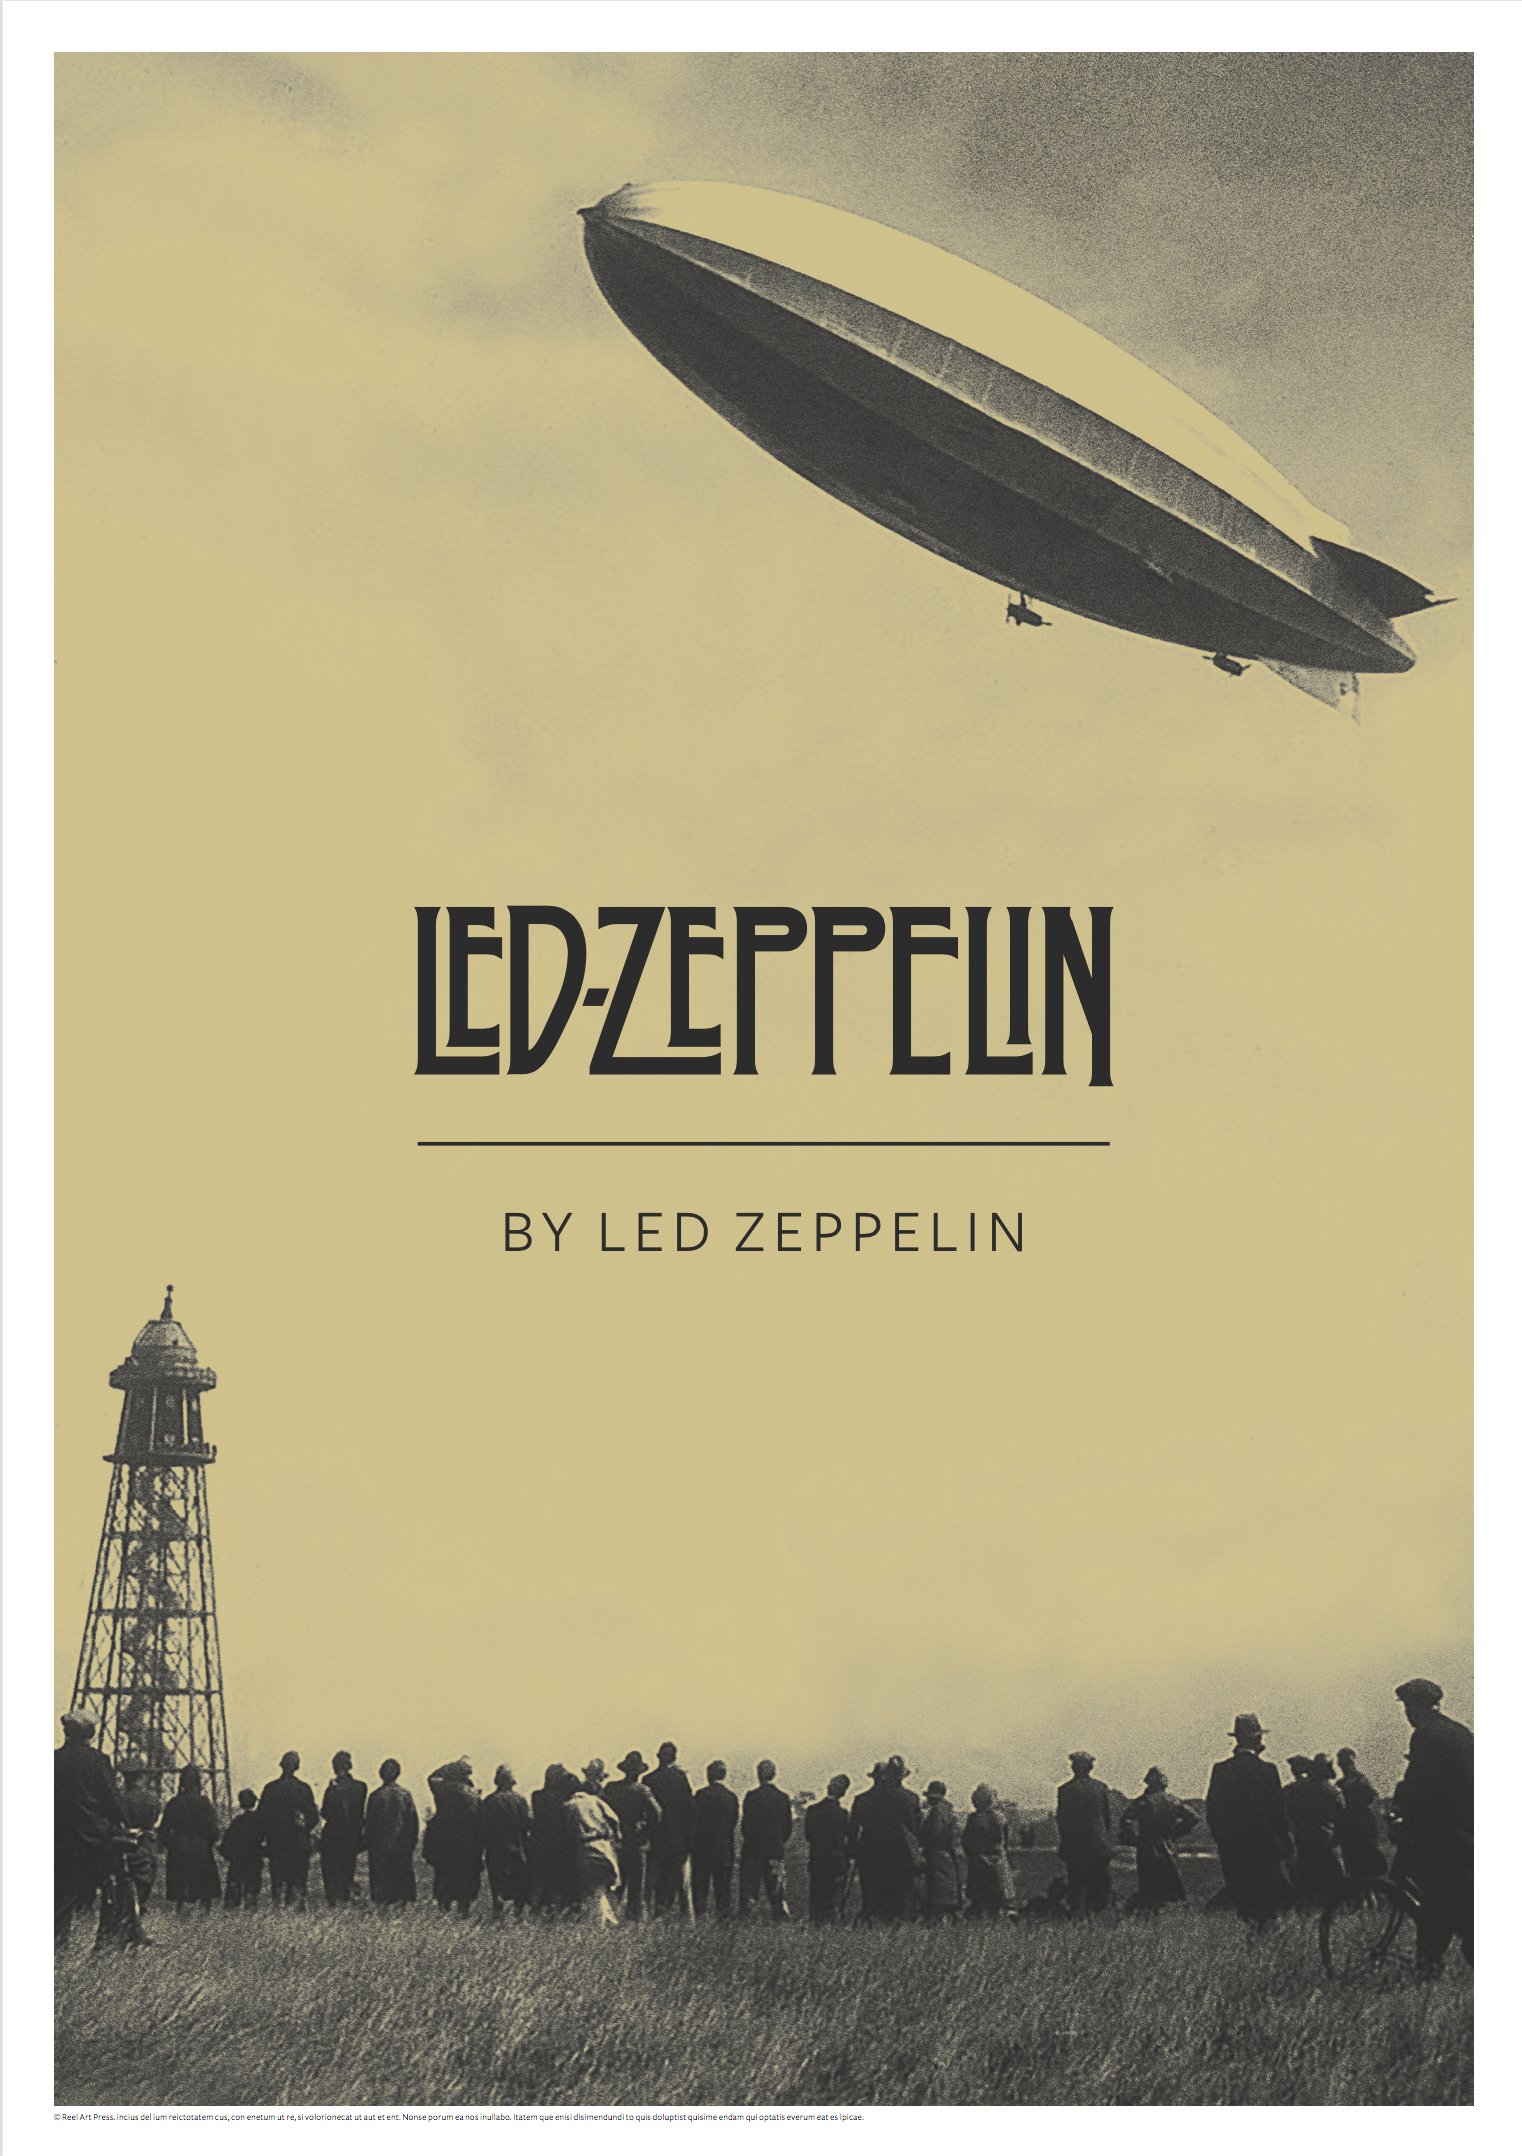 Led Zeppelin on "SUPPORT INDEPENDENT RETAIL - EXCLUSIVE R|A|P LED ZEPPELIN POSTER Until Sept. pre-order Led Zeppelin by Led Zeppelin at independent retailer or https://t.co/Ln76DjLszl &amp; get a Ltd